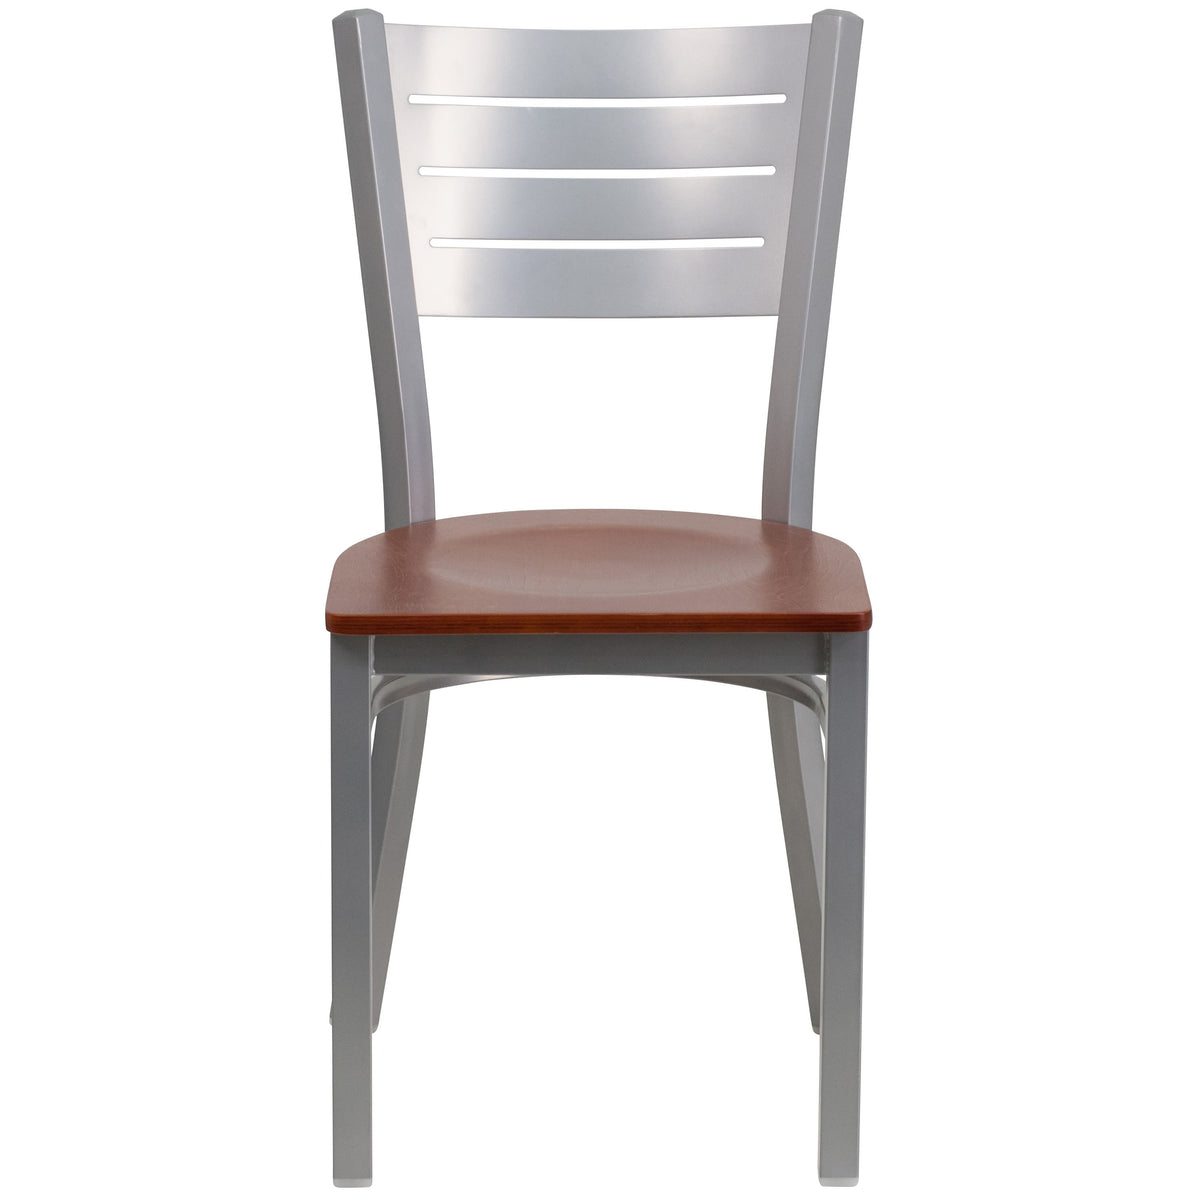 Cherry Wood Seat/Silver Frame |#| Silver Slat Back Metal Restaurant Chair - Cherry Wood Seat